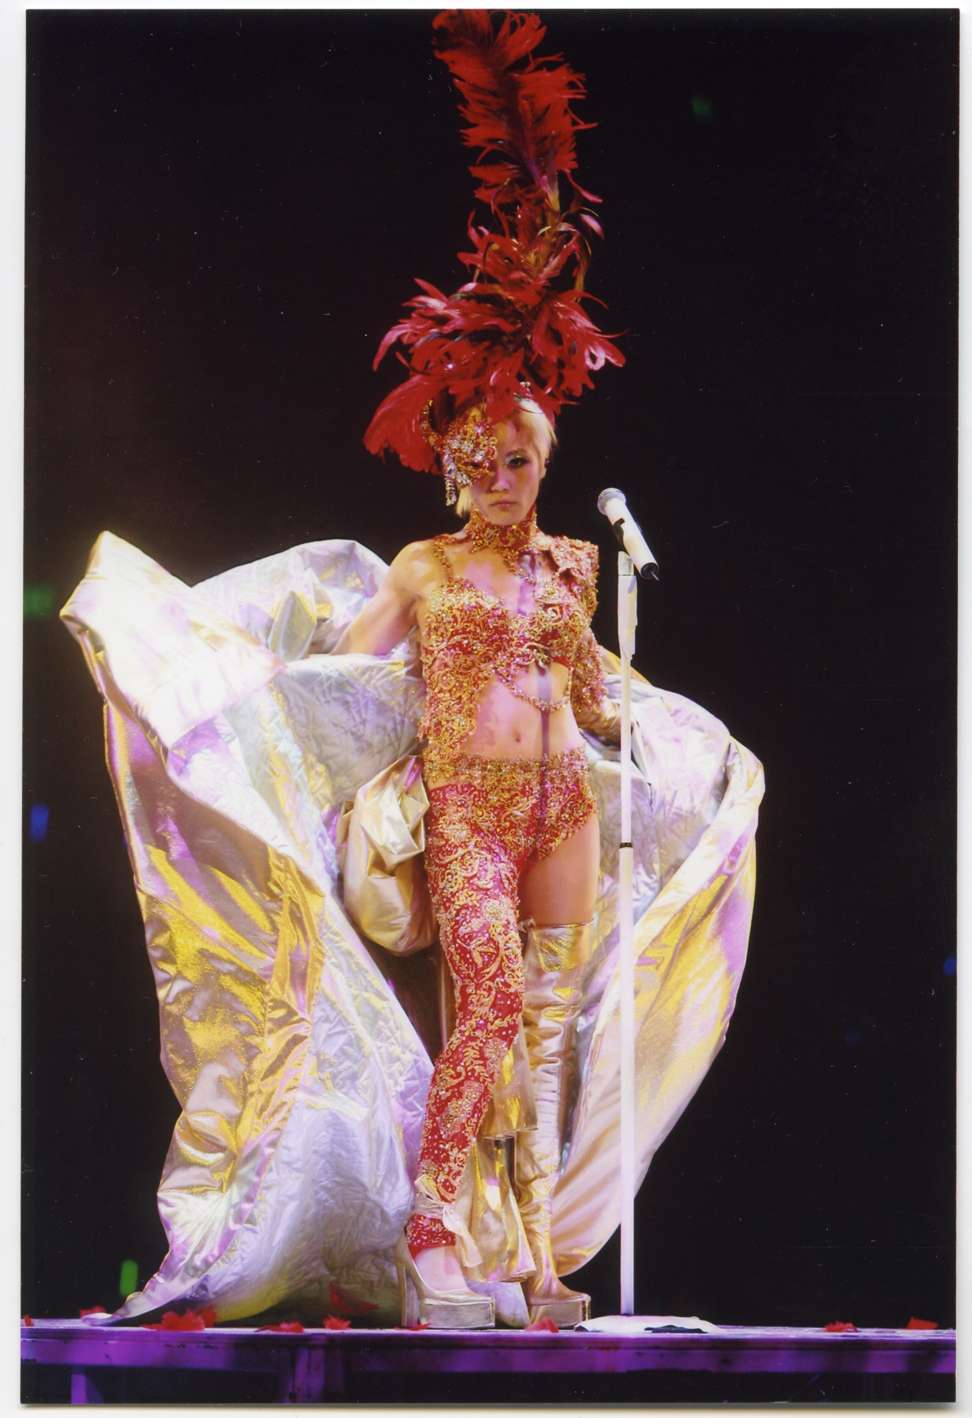 A stage costume designed by Eddie Lau for a 2006 concert by singer Denise Ho, shown in the Ambiguously Yours exhibition. Photo: courtesy of Hong Kong Heritage Museum and M+